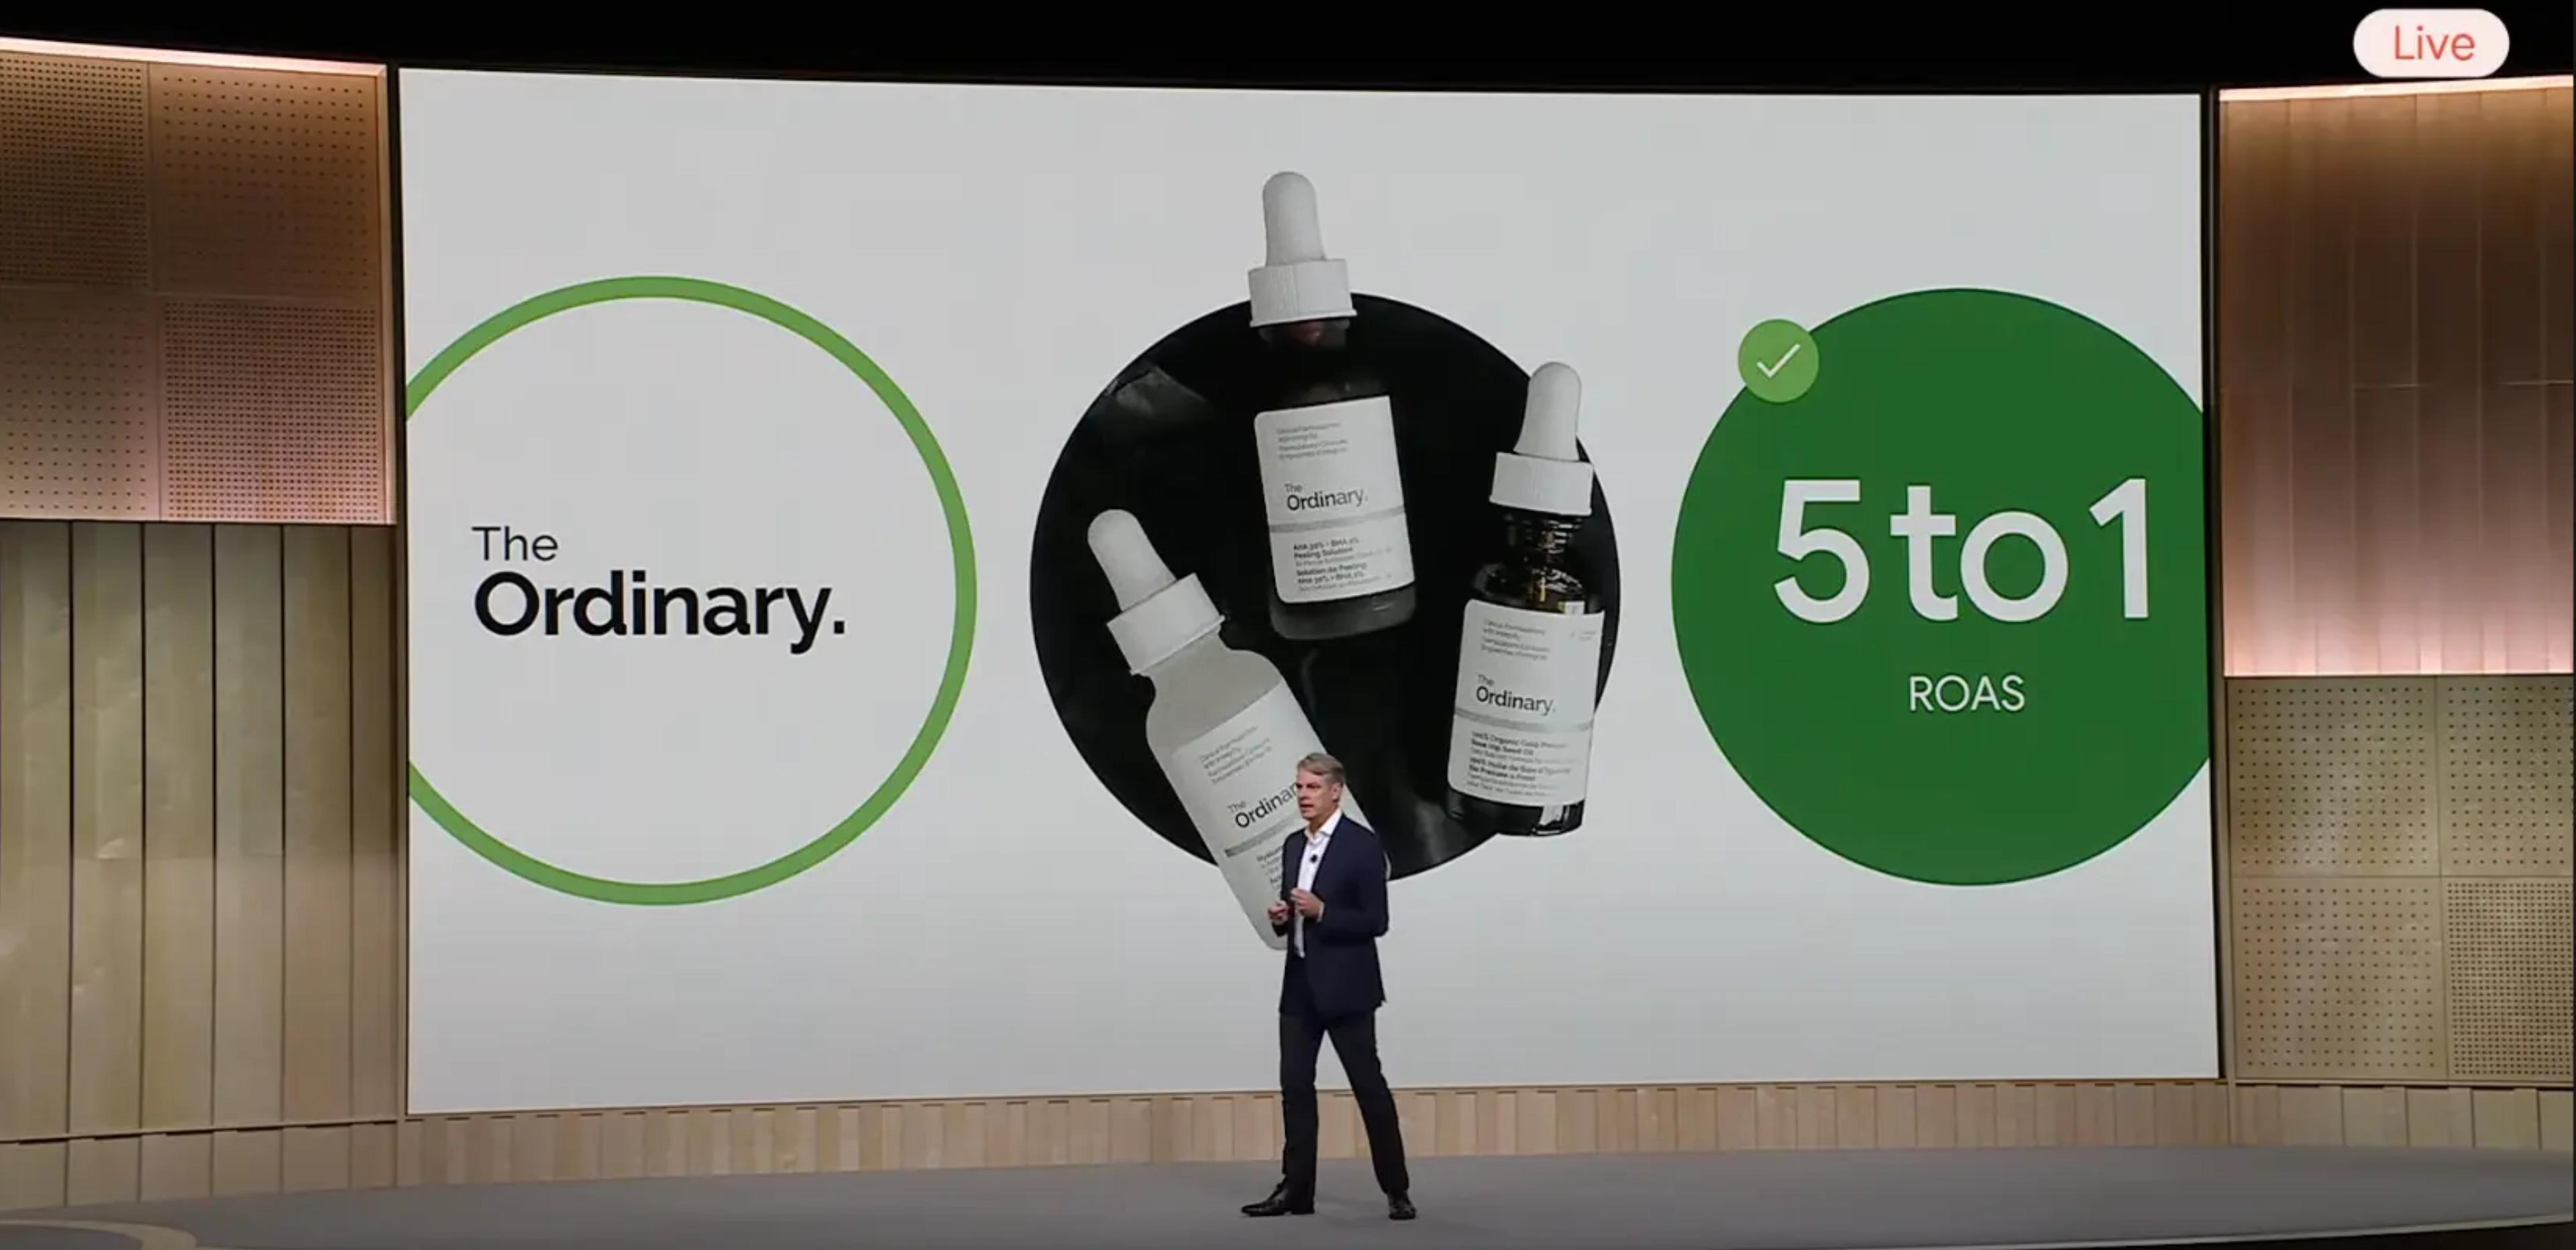 Image shows brand logo and products for The Ordinary with a statistic for 5 to 1 ROAS 